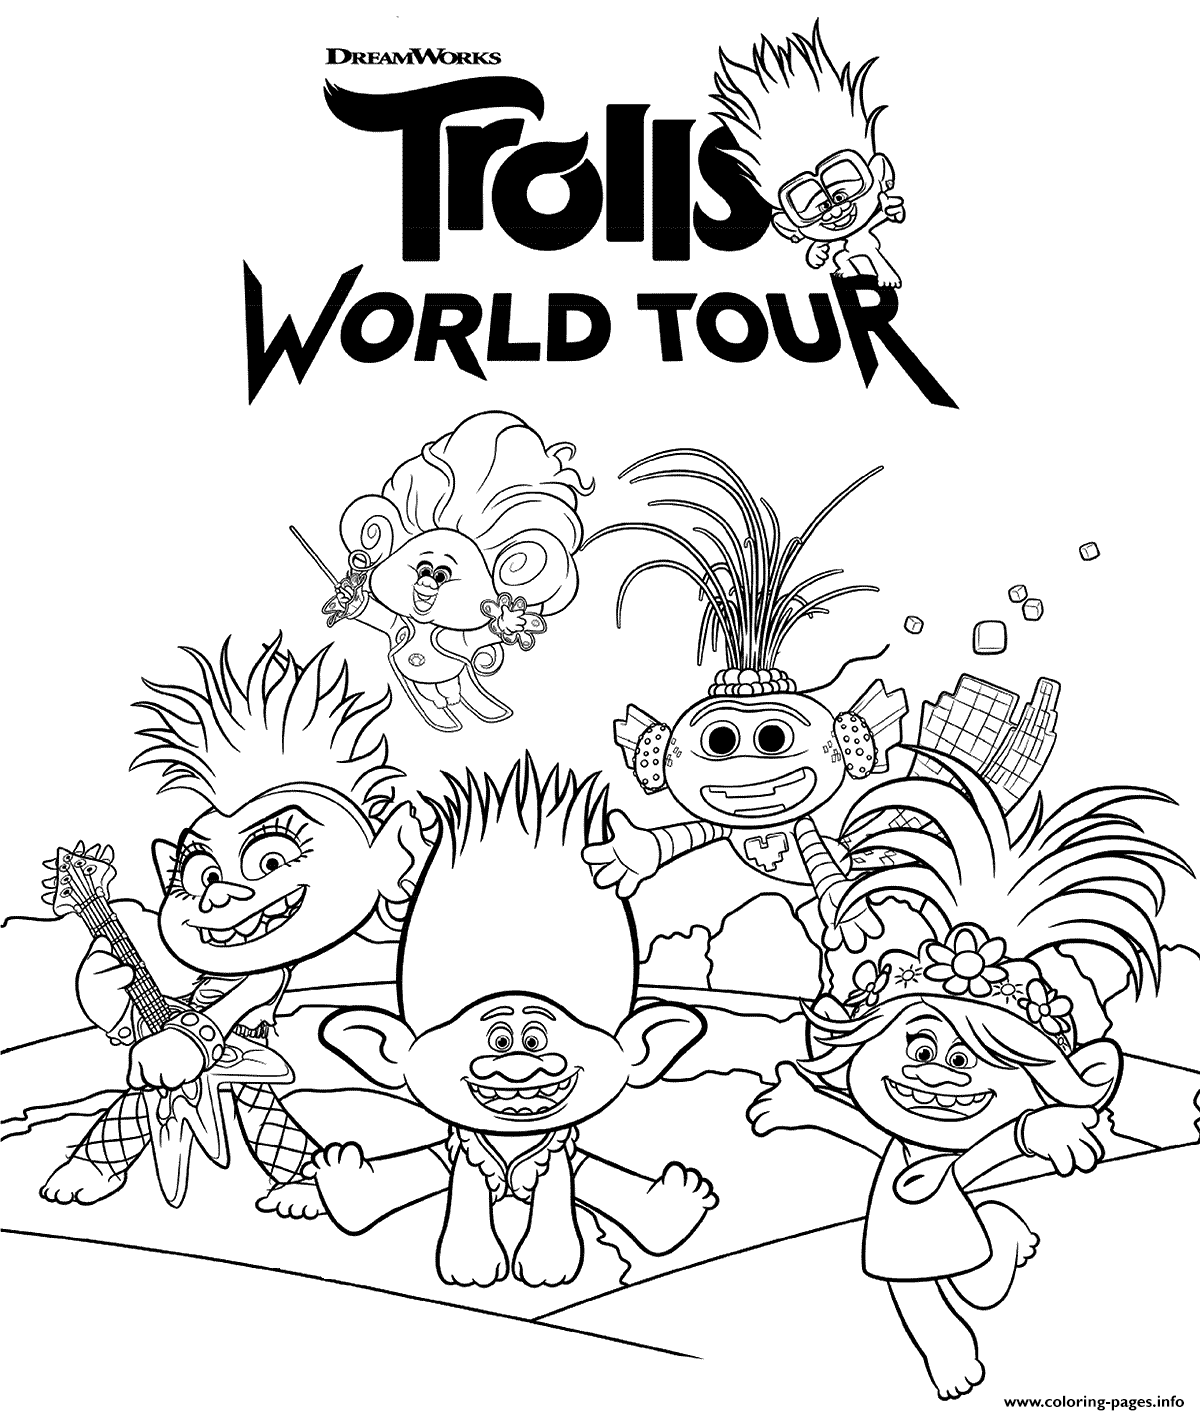 DreamWorks Trolls 2 World Tour Coloring Pages Printable